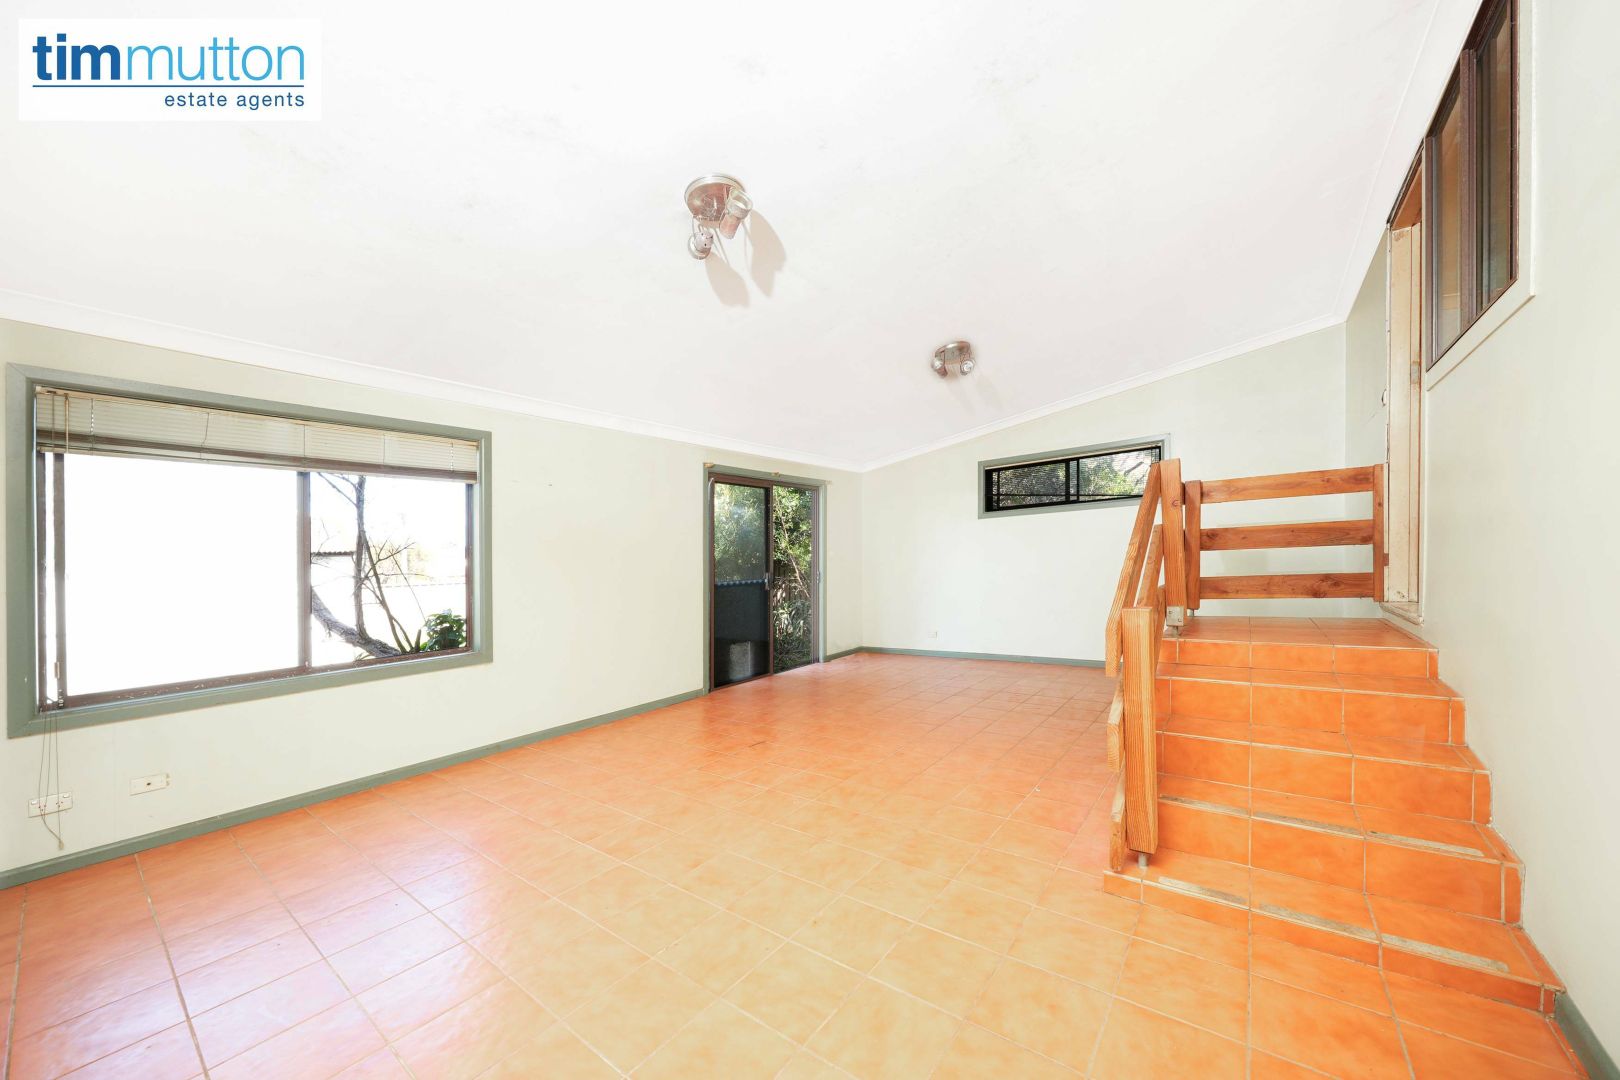 79 Beaconsfield St, Revesby NSW 2212, Image 2